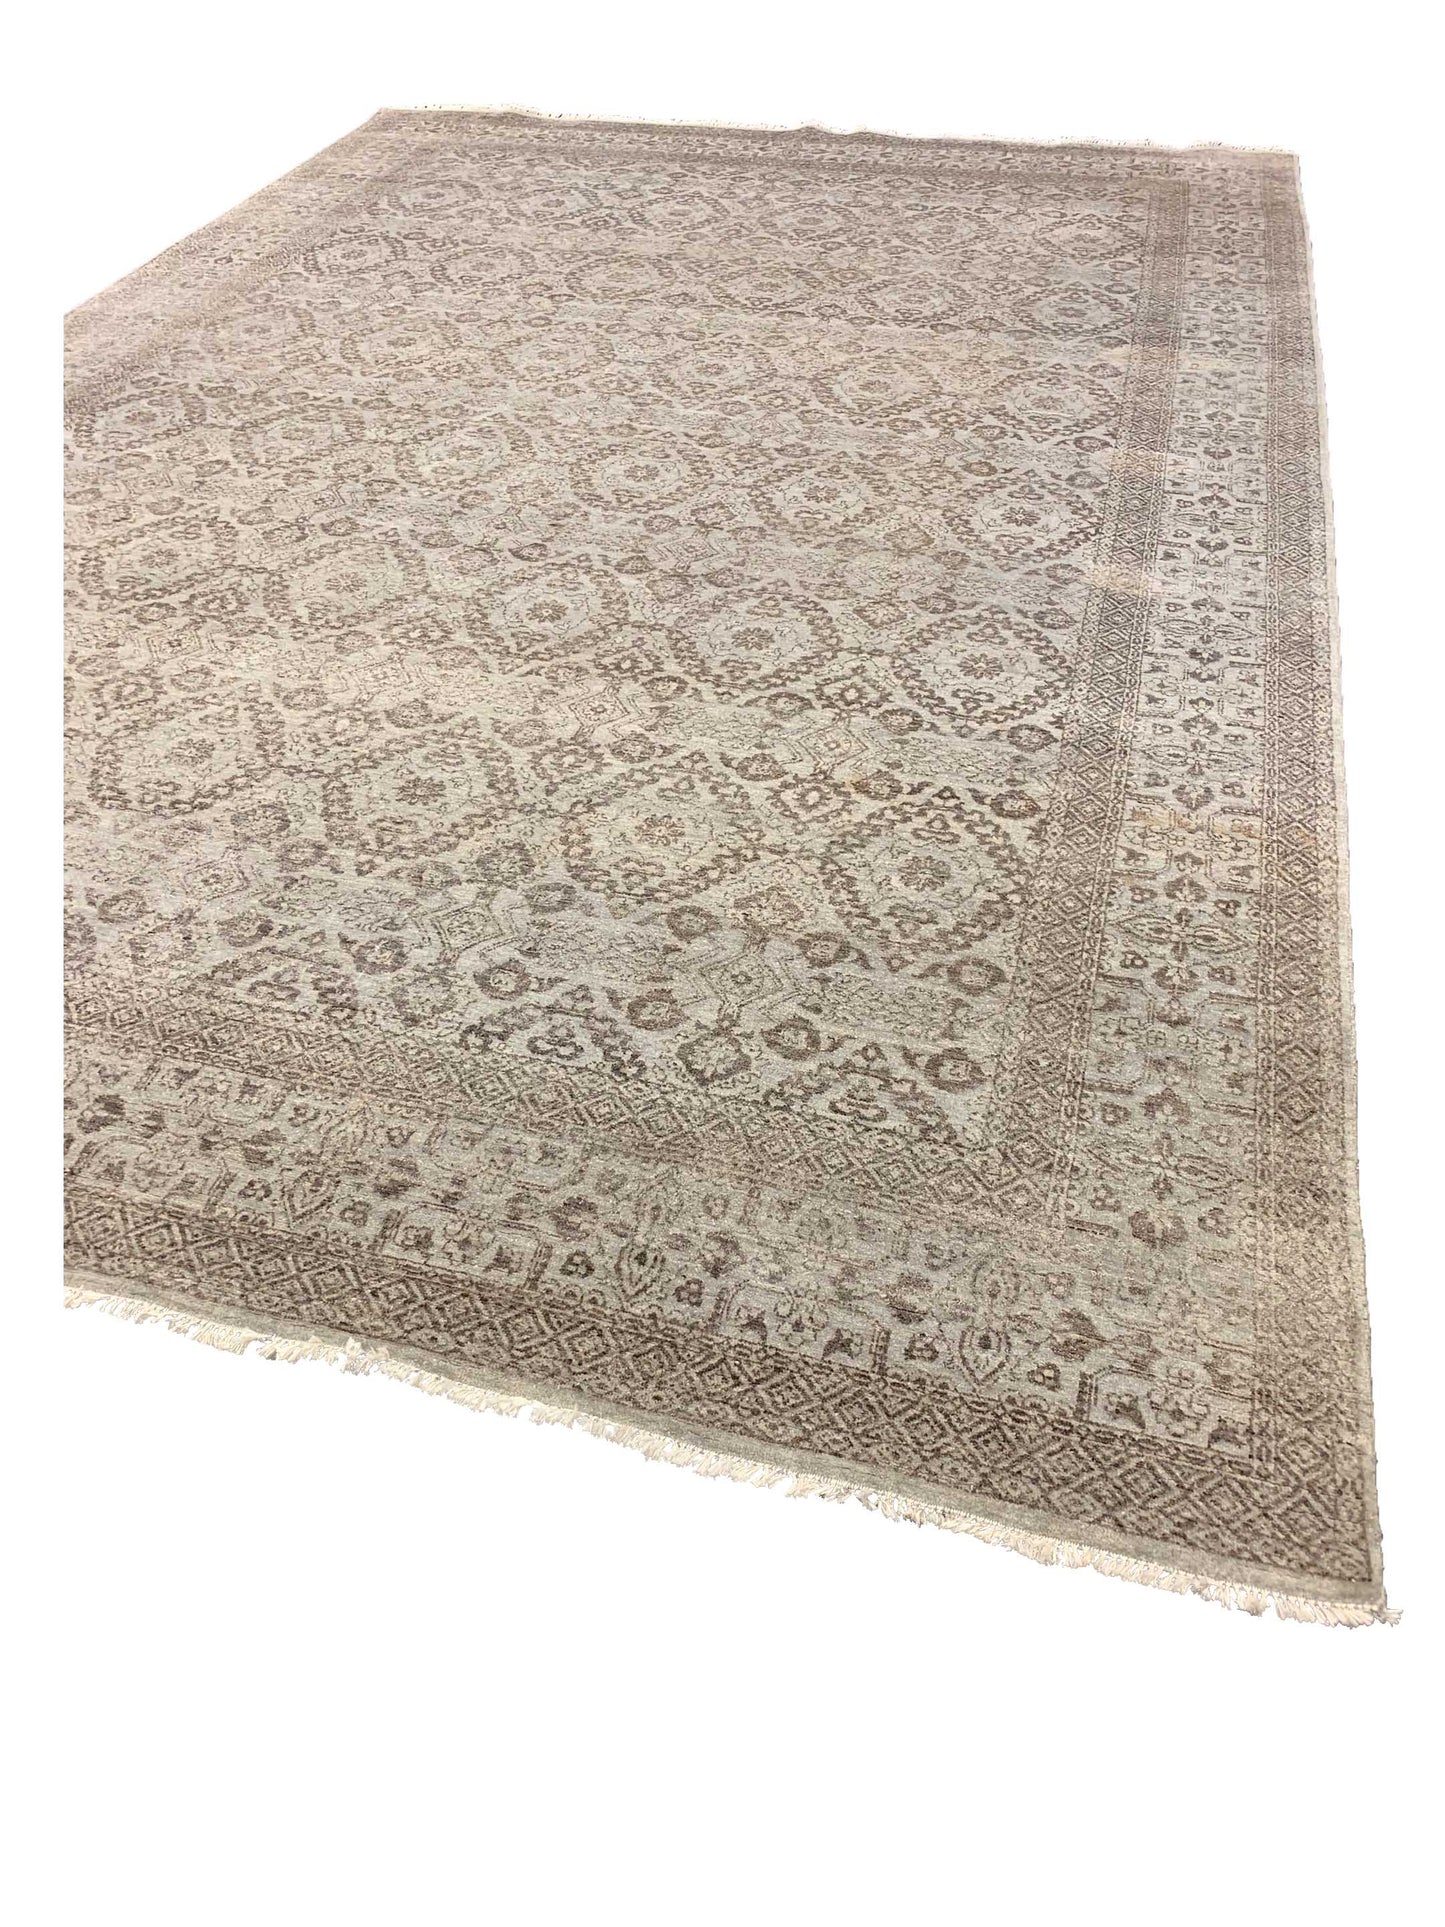 Artisan Victoria  Silver  Modern Knotted Rug